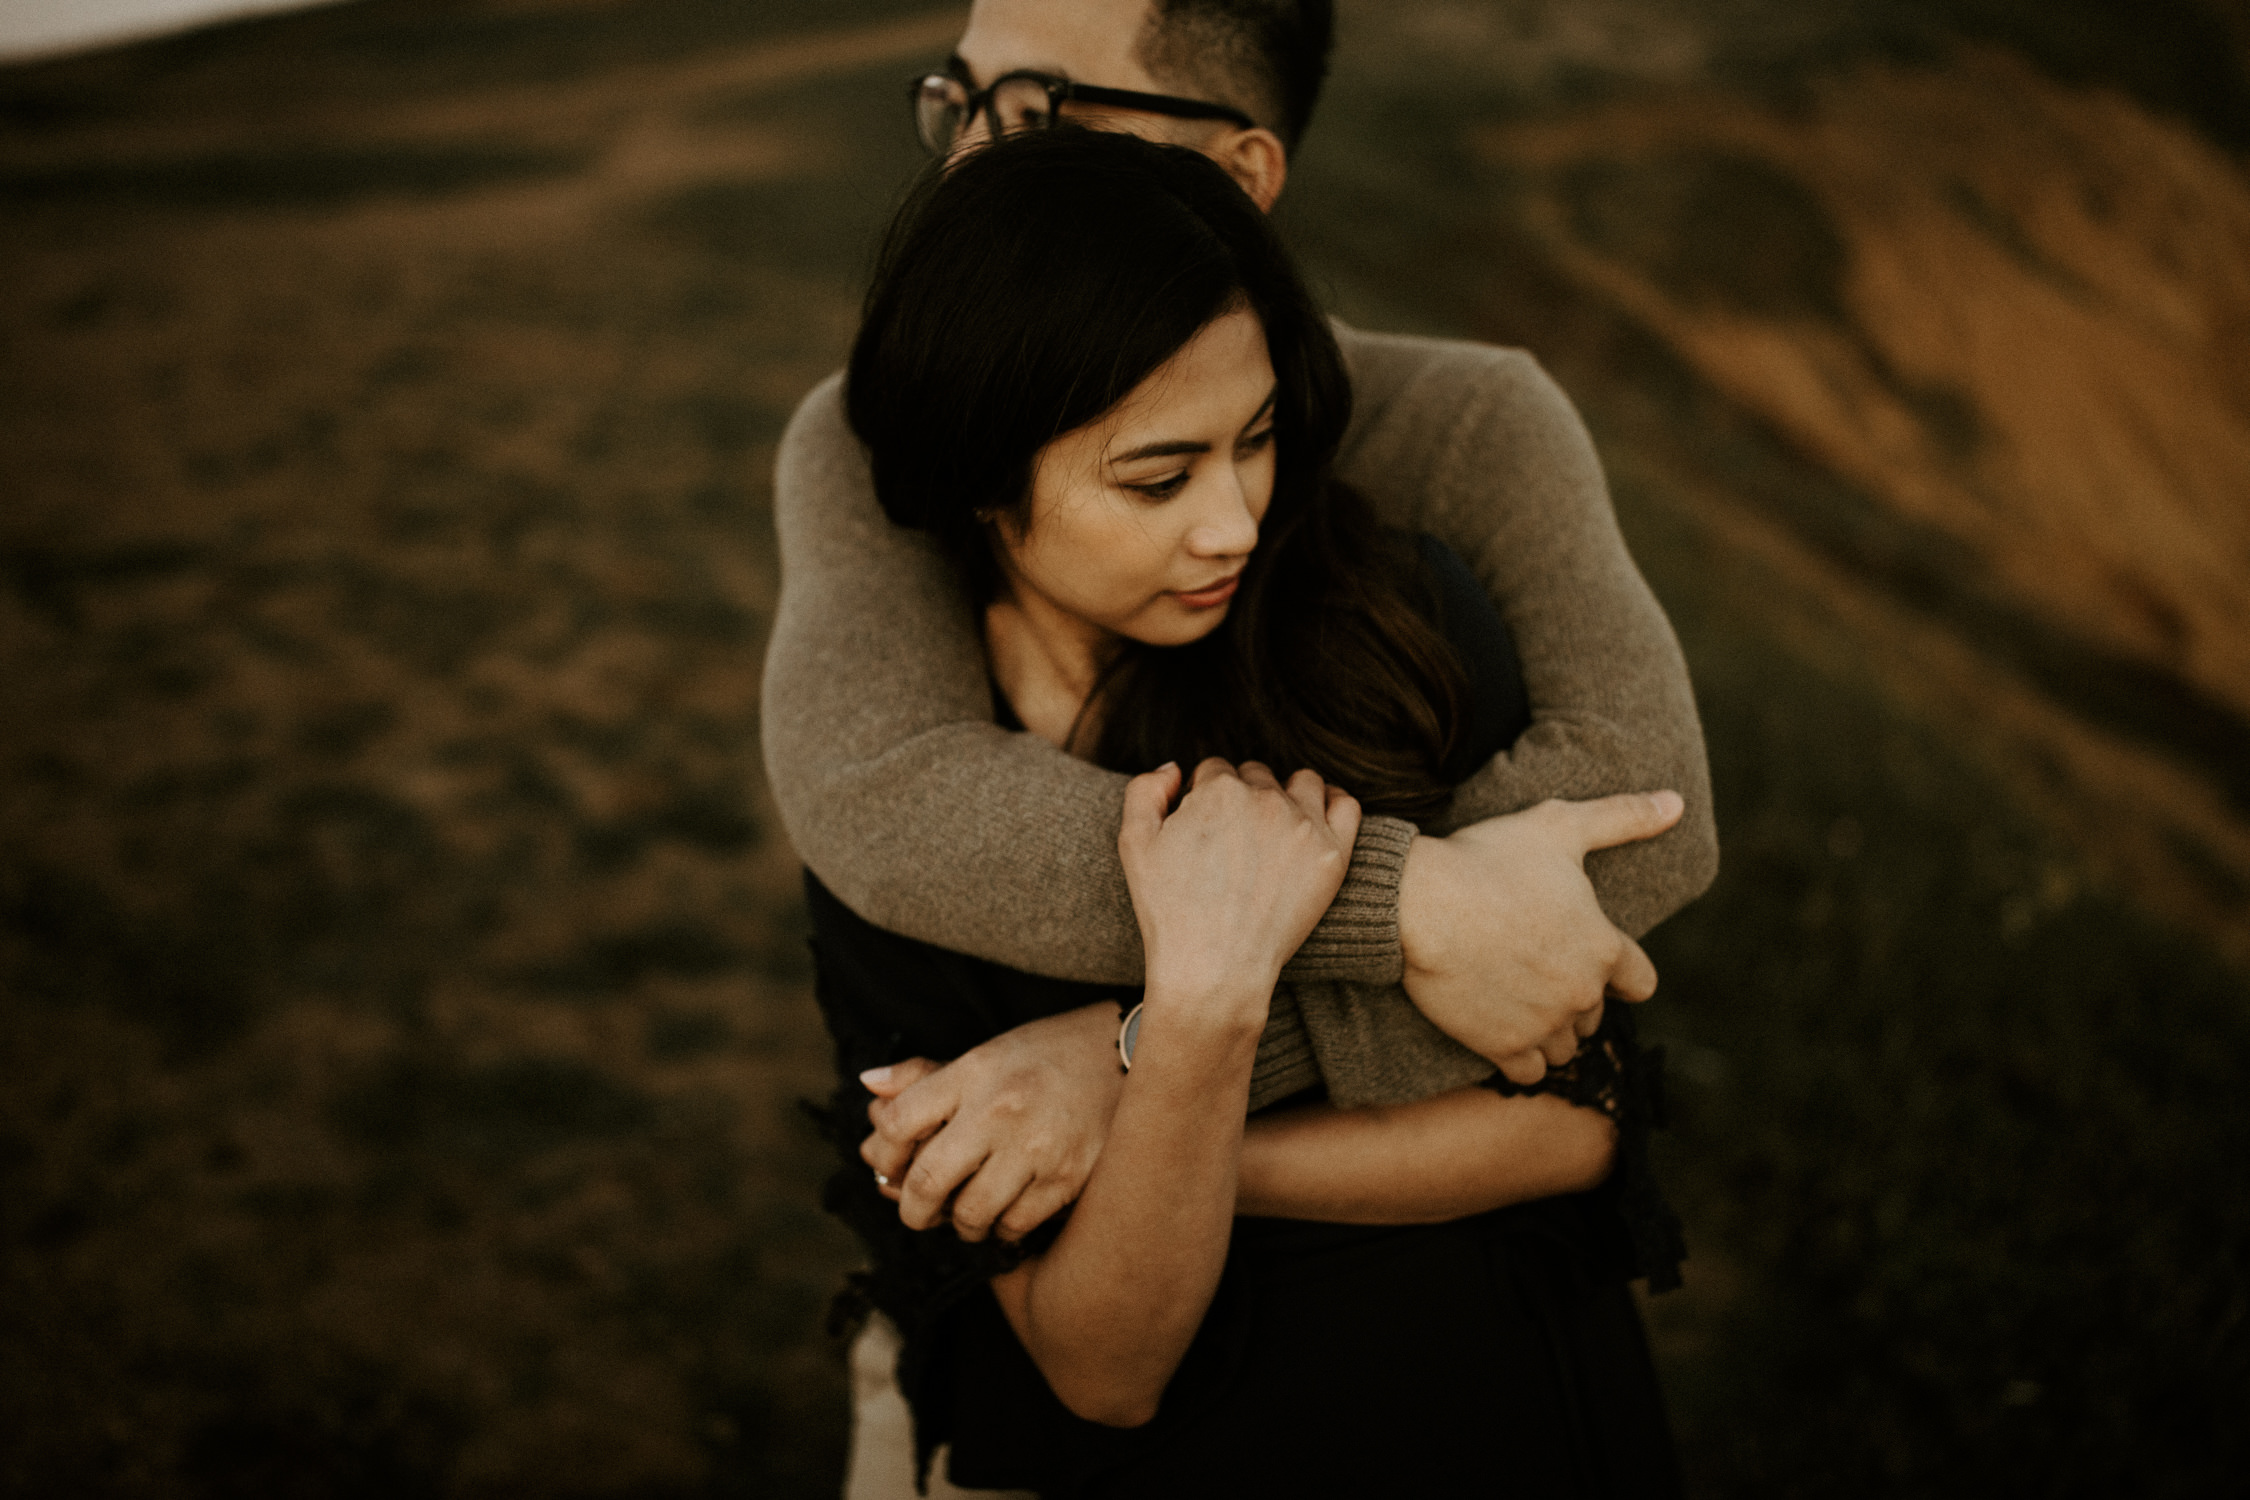 couple-intimate-engagement-session-northern-california-94.jpg